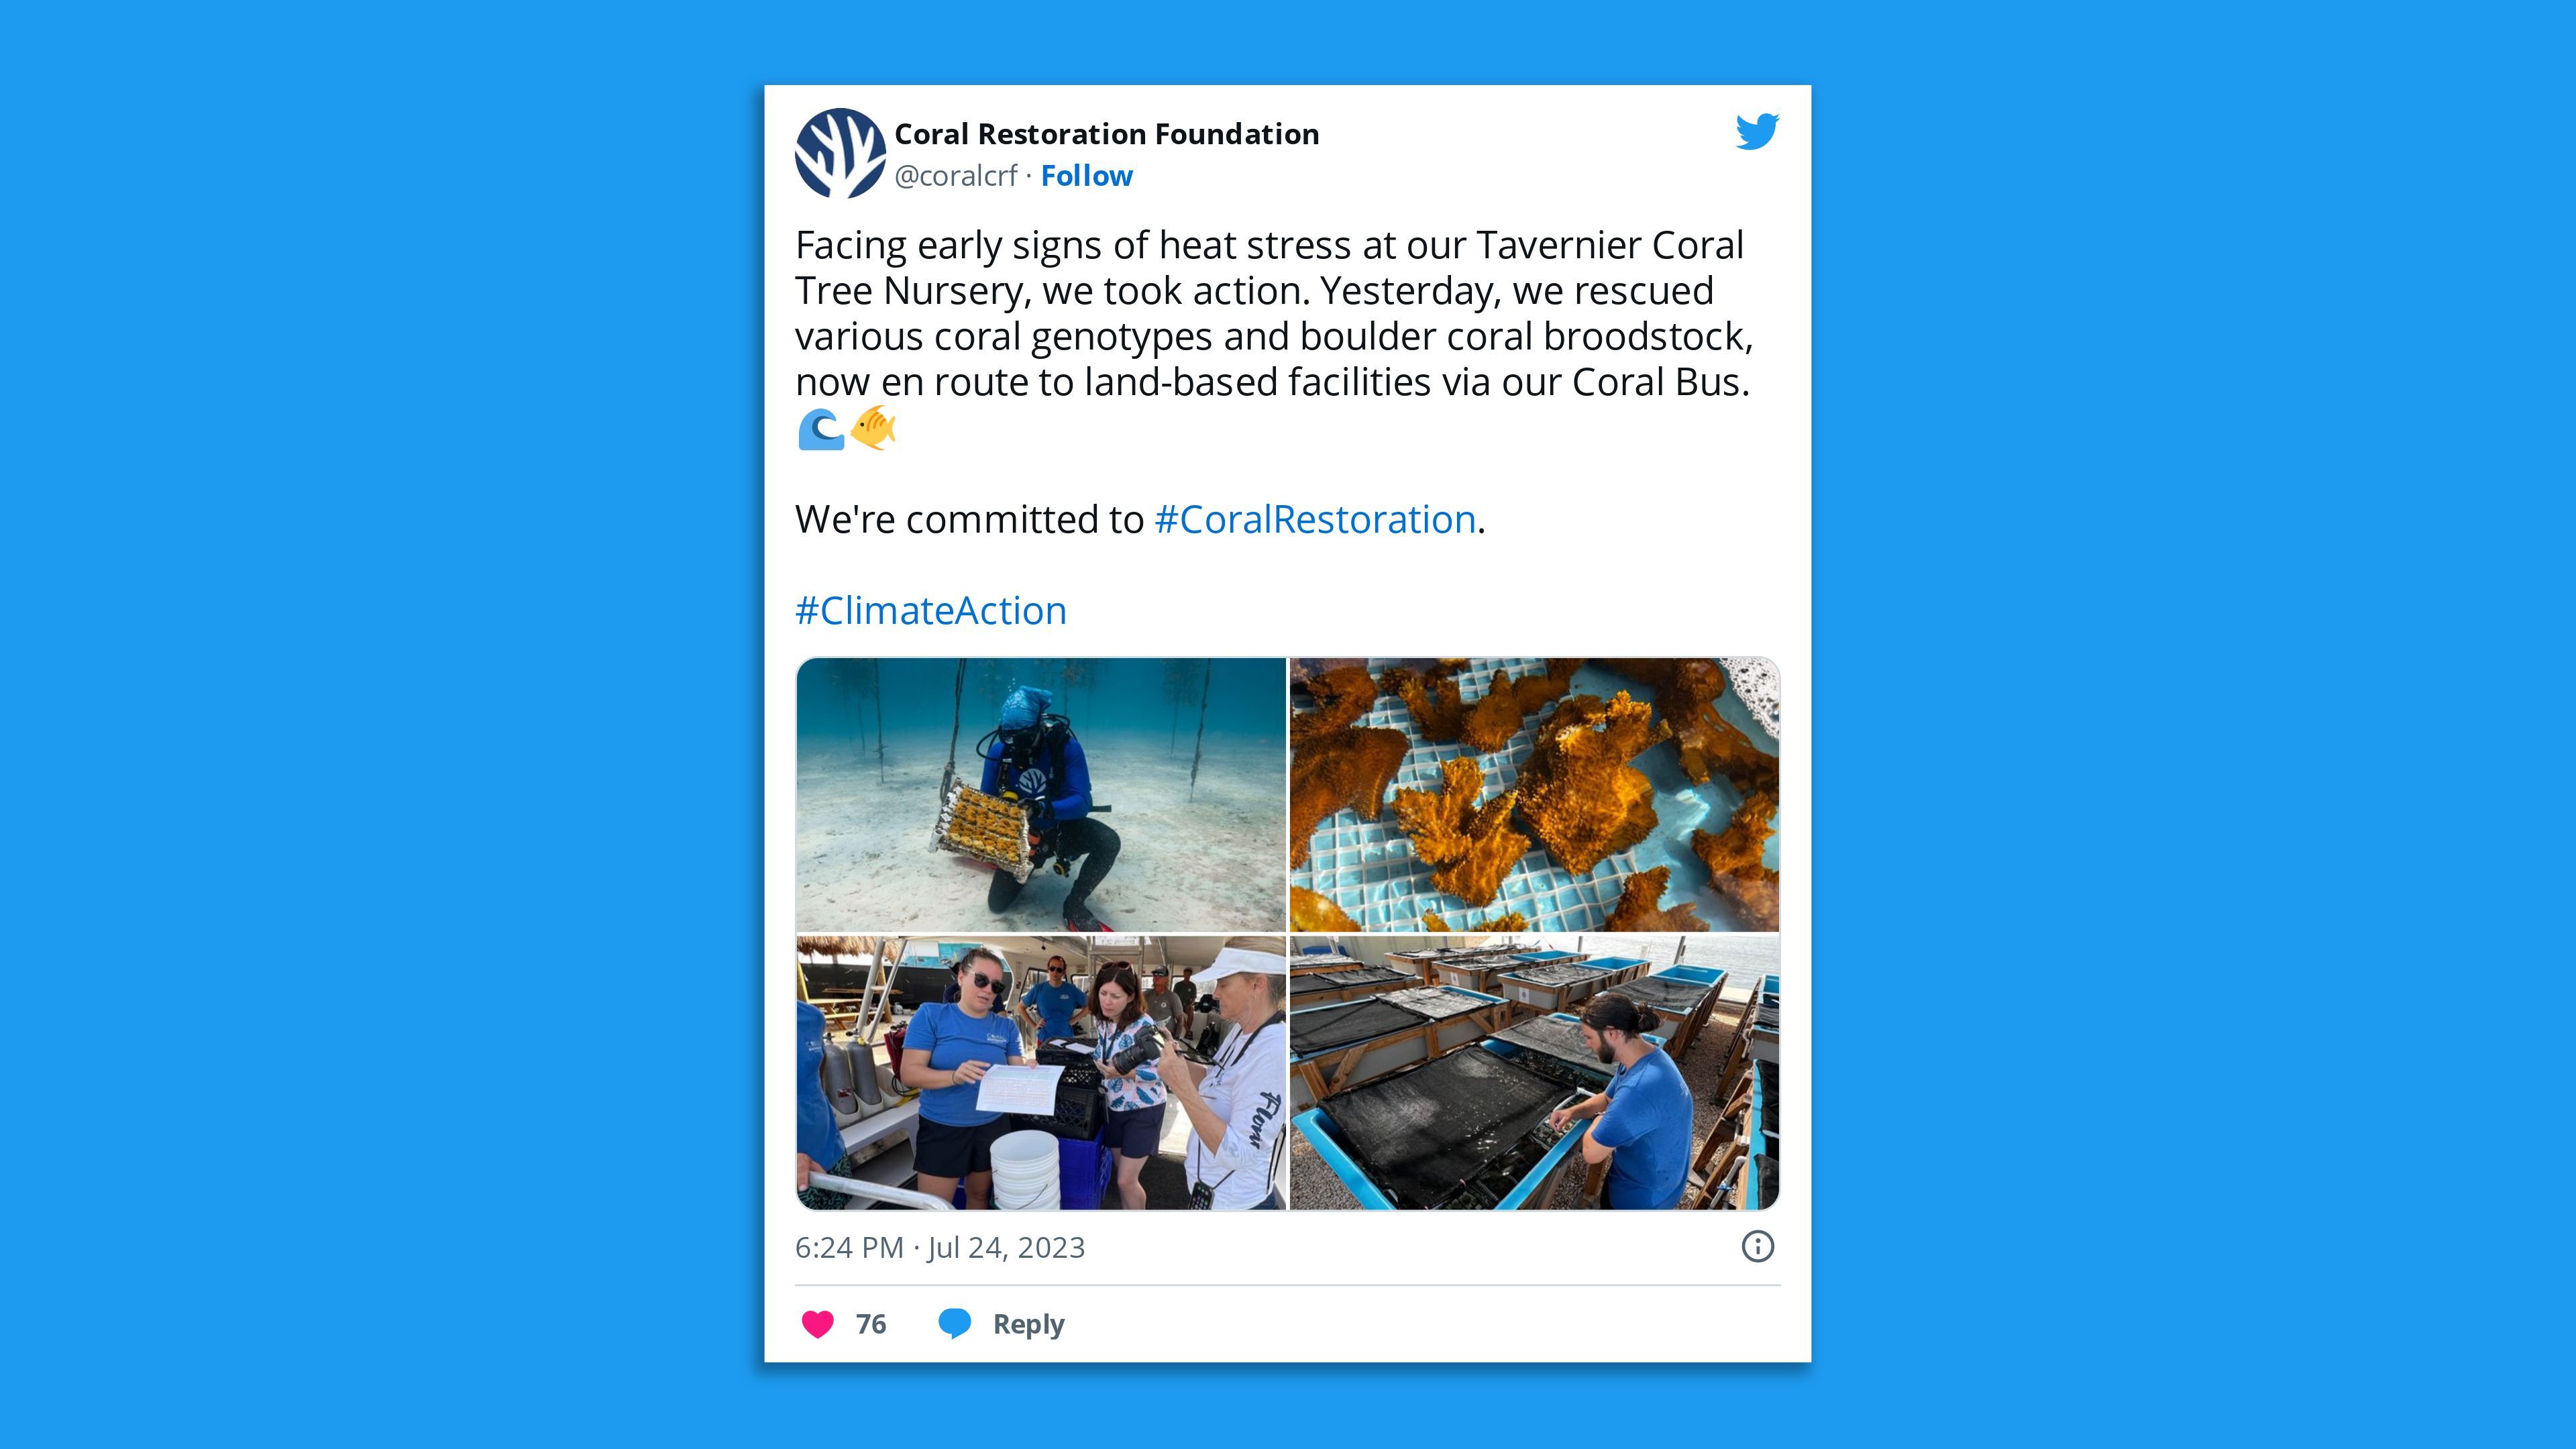 A screenshot of a tweet from the Coral Restoration Foundation, saying: "Facing early signs of heat stress at our Tavernier Coral Tree Nursery, we took action. Yesterday, we rescued various coral genotypes and boulder coral broodstock, now en route to land-based facilities via our Coral Bus. 🌊🐠  We're committed to #CoralRestoration."